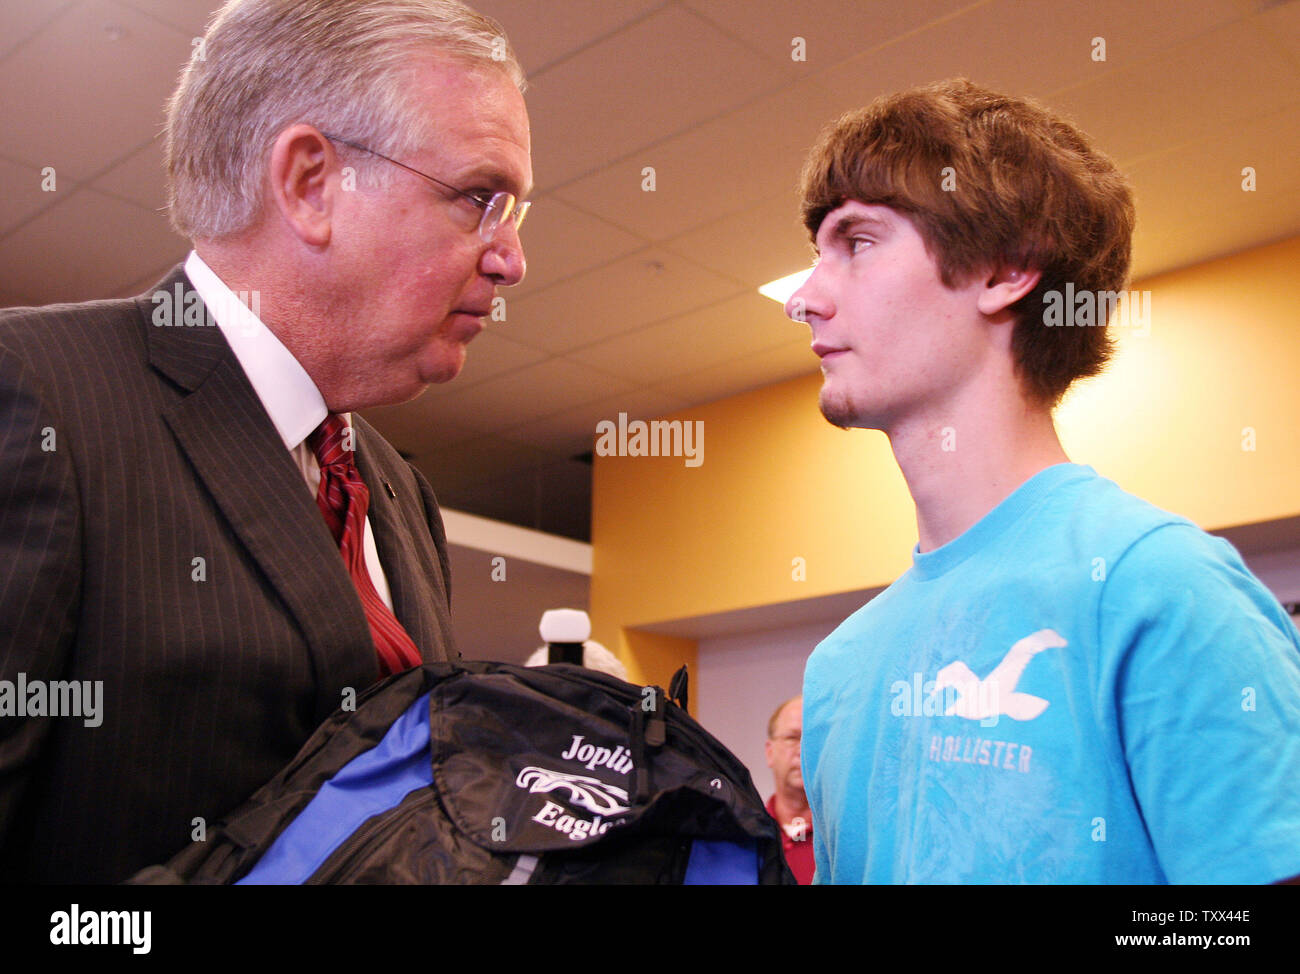 Mo. Gov. Jay Nixon hands the first computer to senior Quinton Anderson on opening day of school in Joplin, Missouri on August 17, 2011. Anderson, who was critically injured in the May 22 tornado that killed 160 people, lost both parents in the storm. Free laptops were distributed to students at Joplin High School as part of a $1 million gift from the United Arab Emirates.  UPI/Tom Uhlenbrock Stock Photo